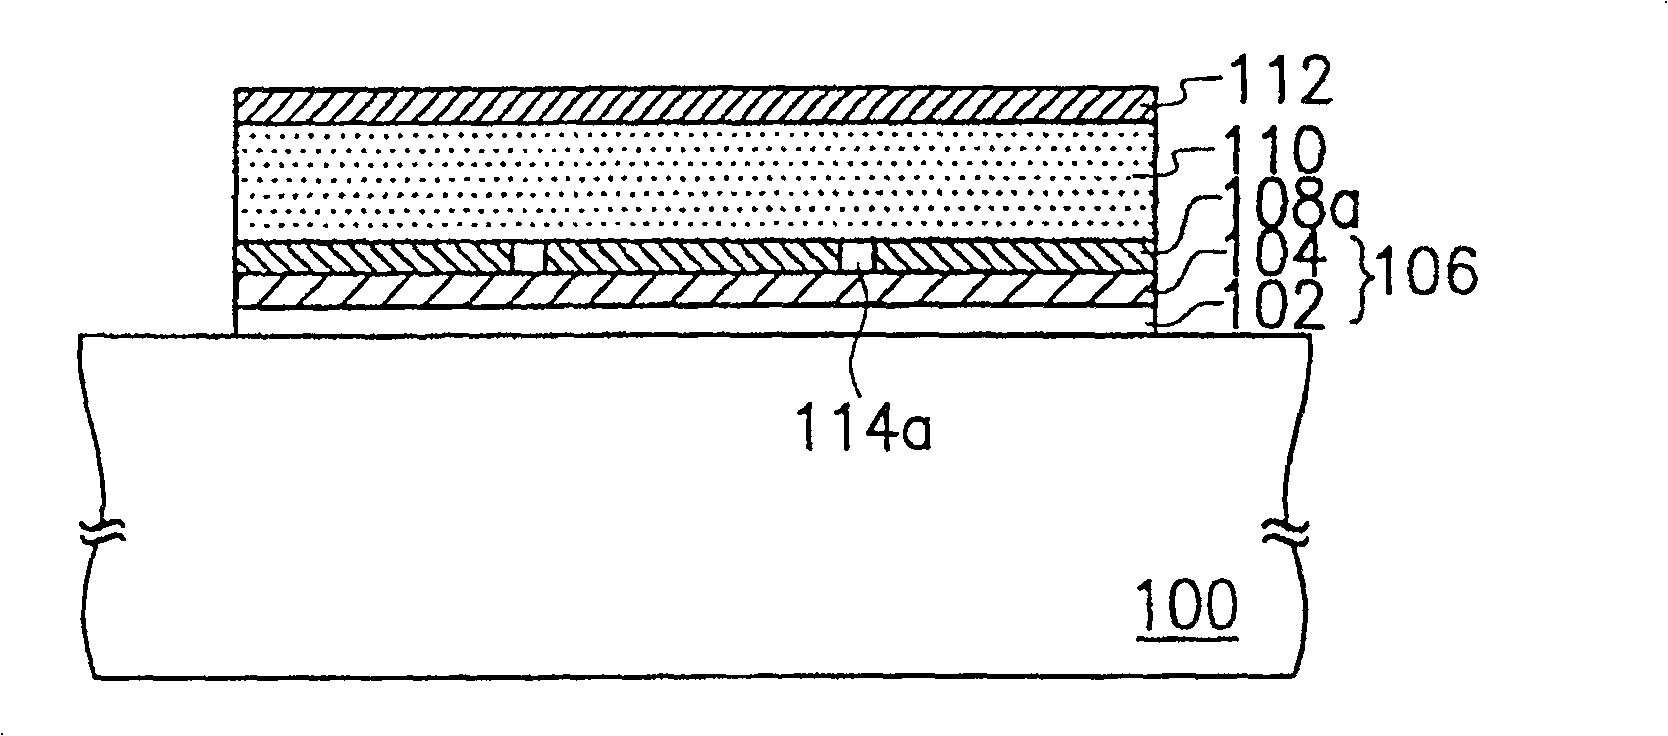 Plane luminous element and method for manufacturing same